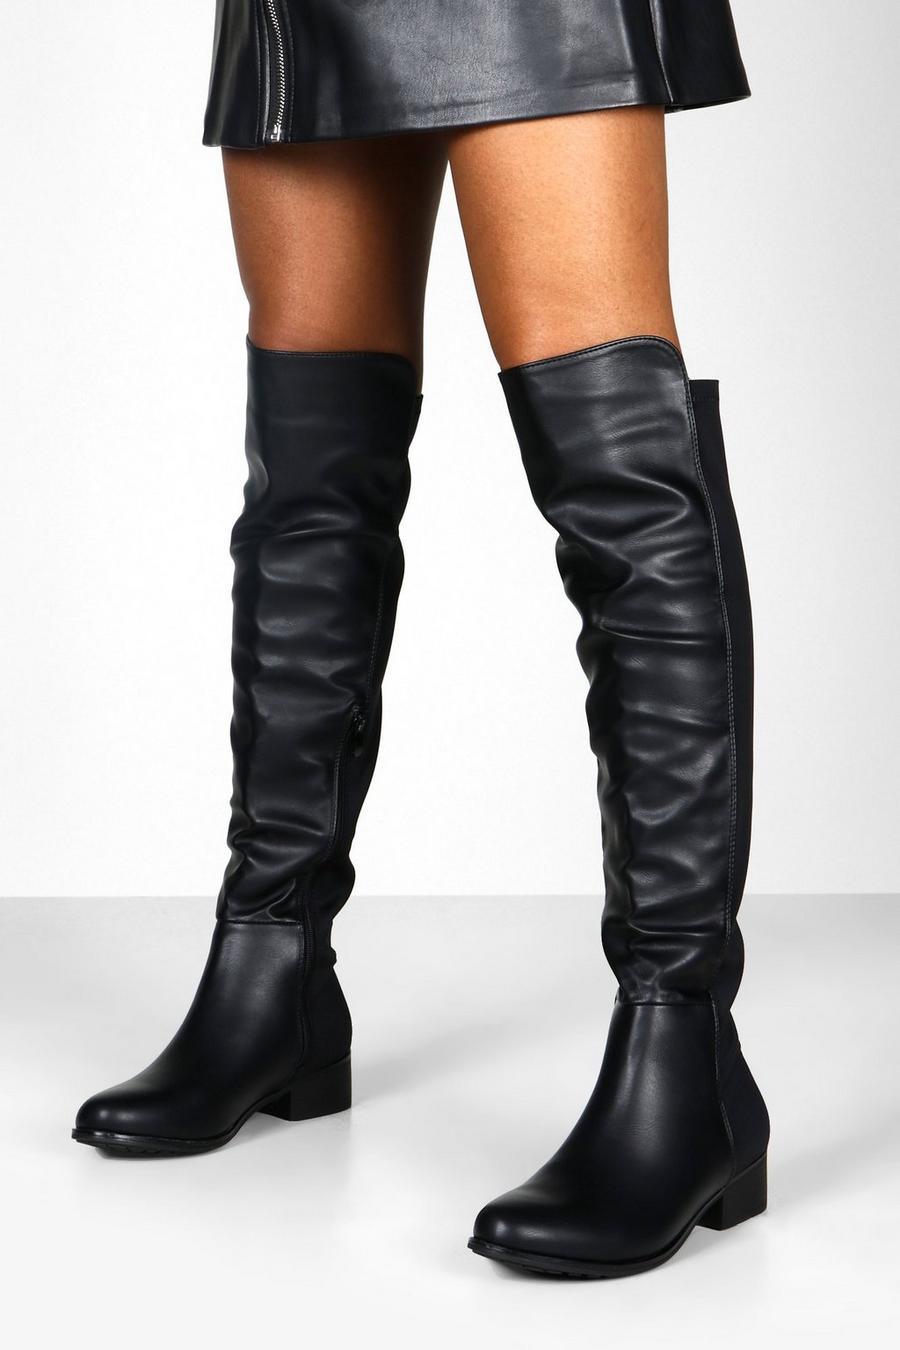 Black Elastic Back Over The Knee High Boots